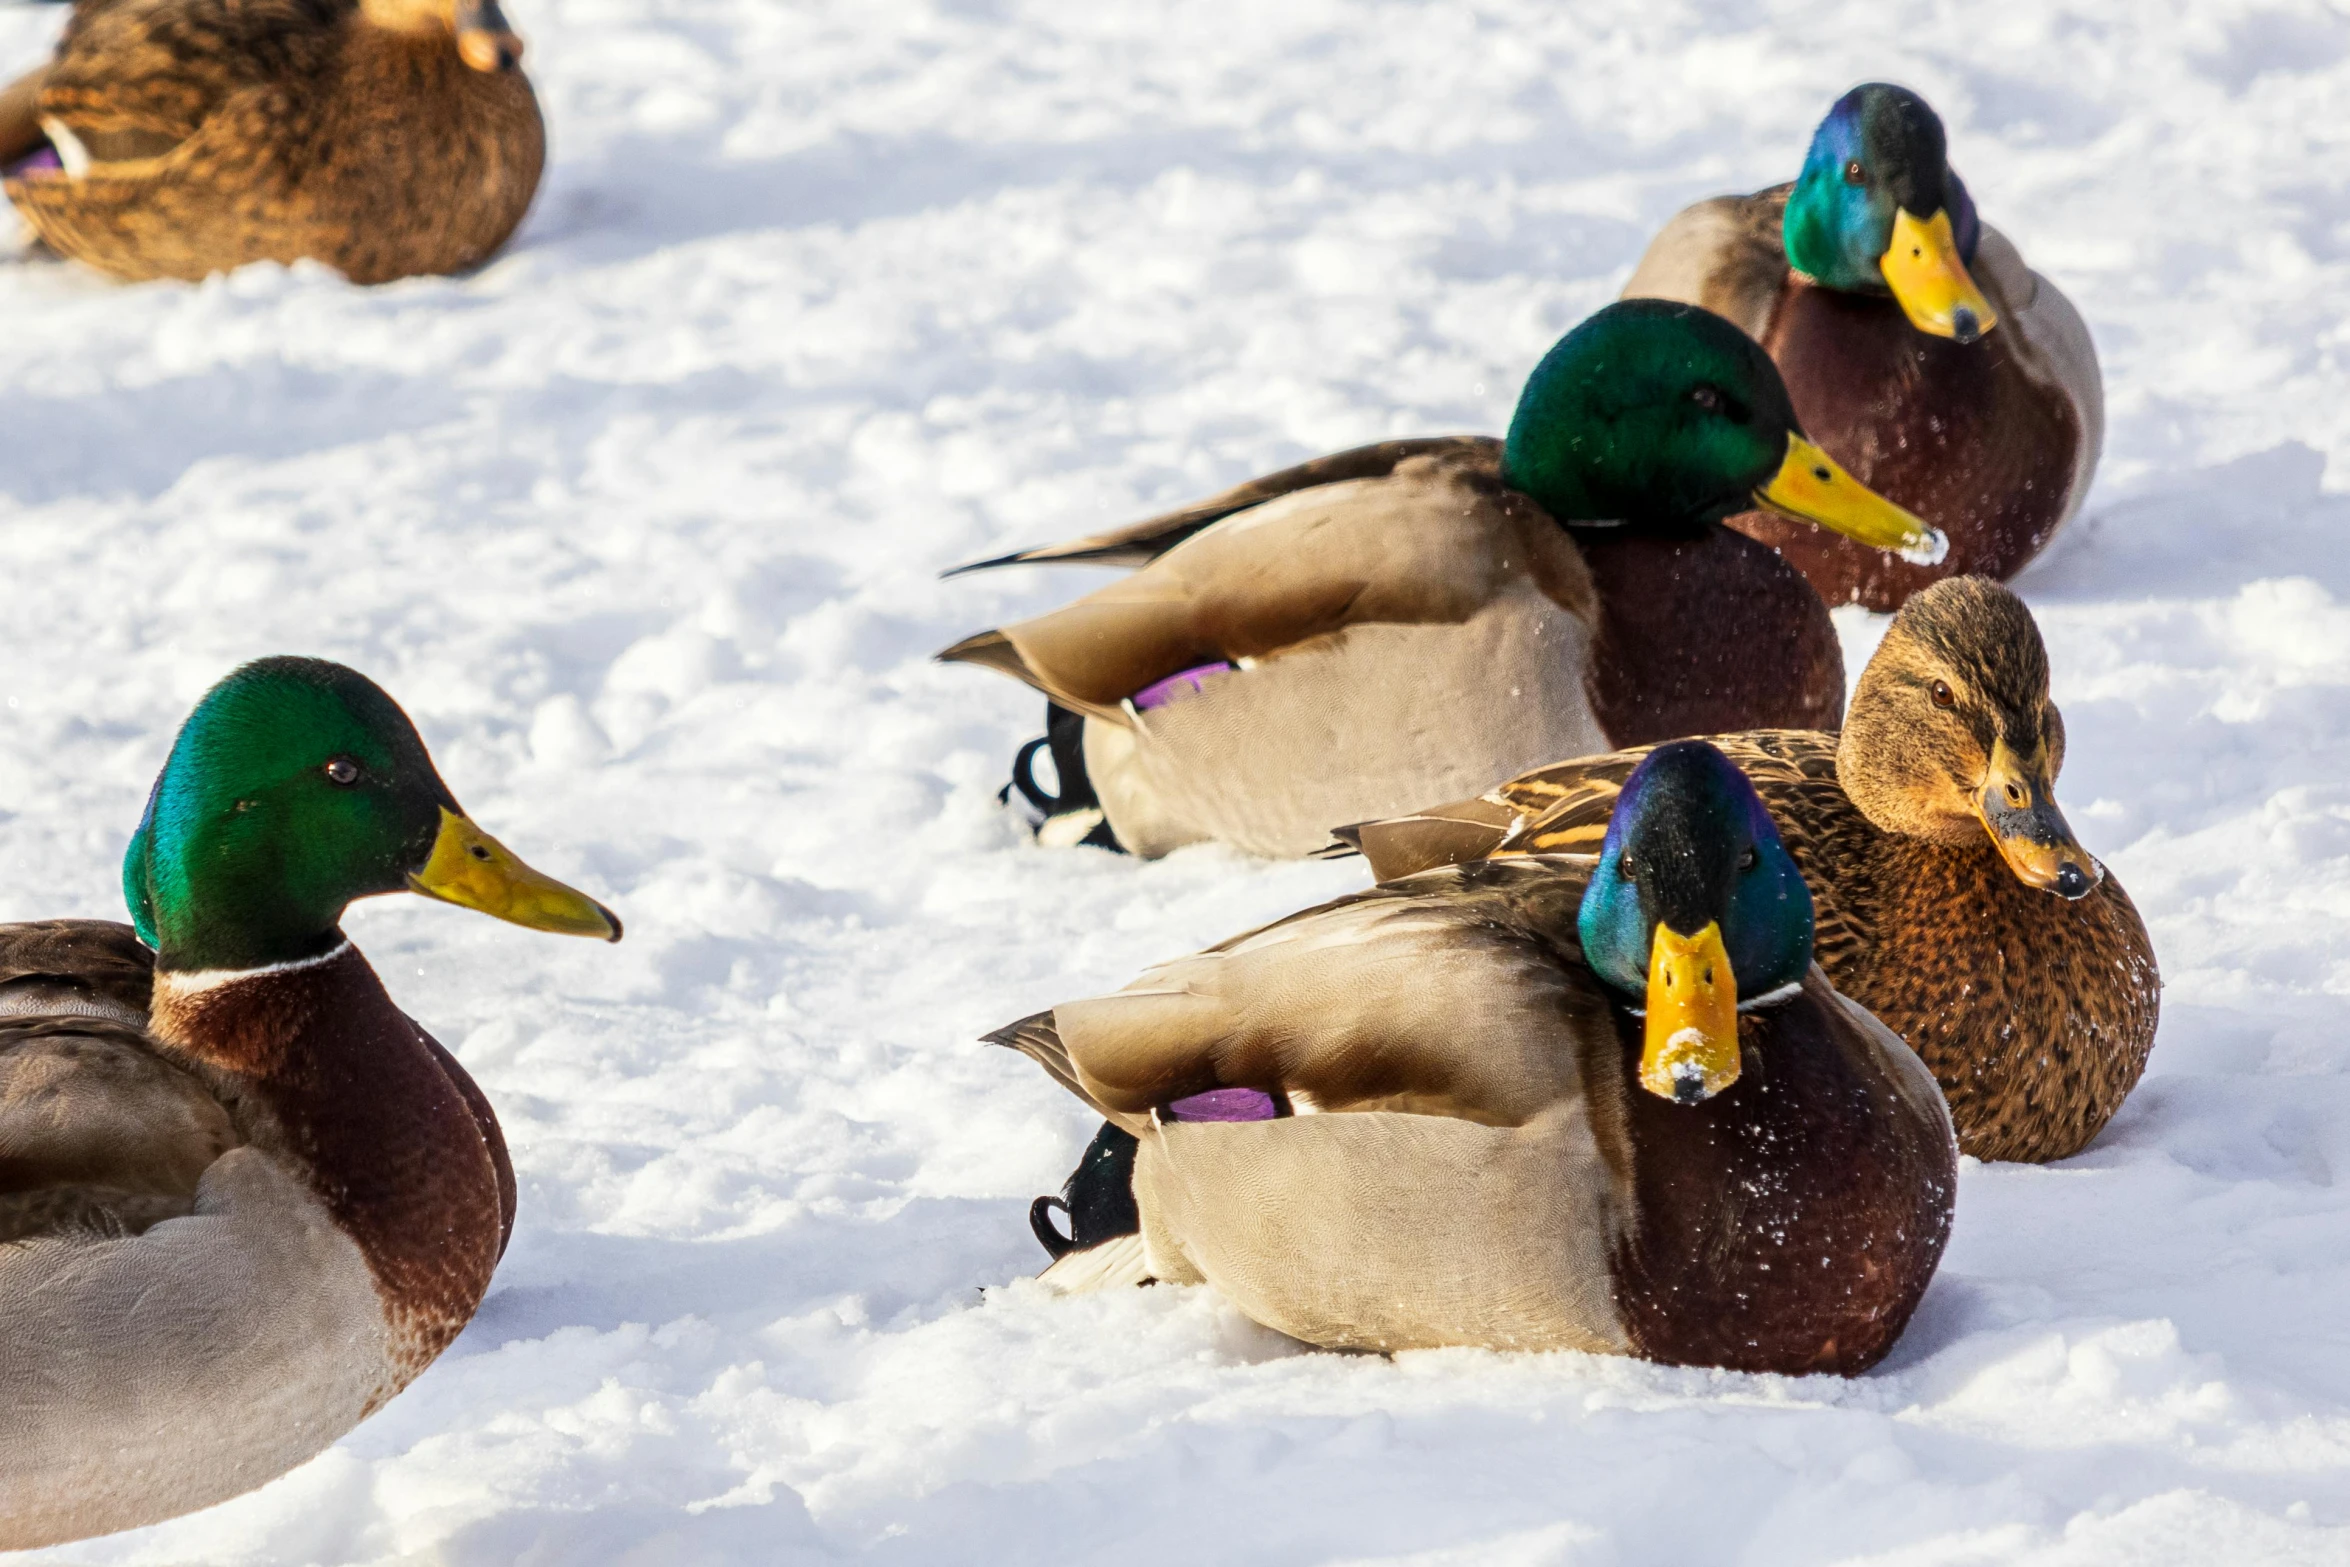 six ducks are huddled in the snow on the ground